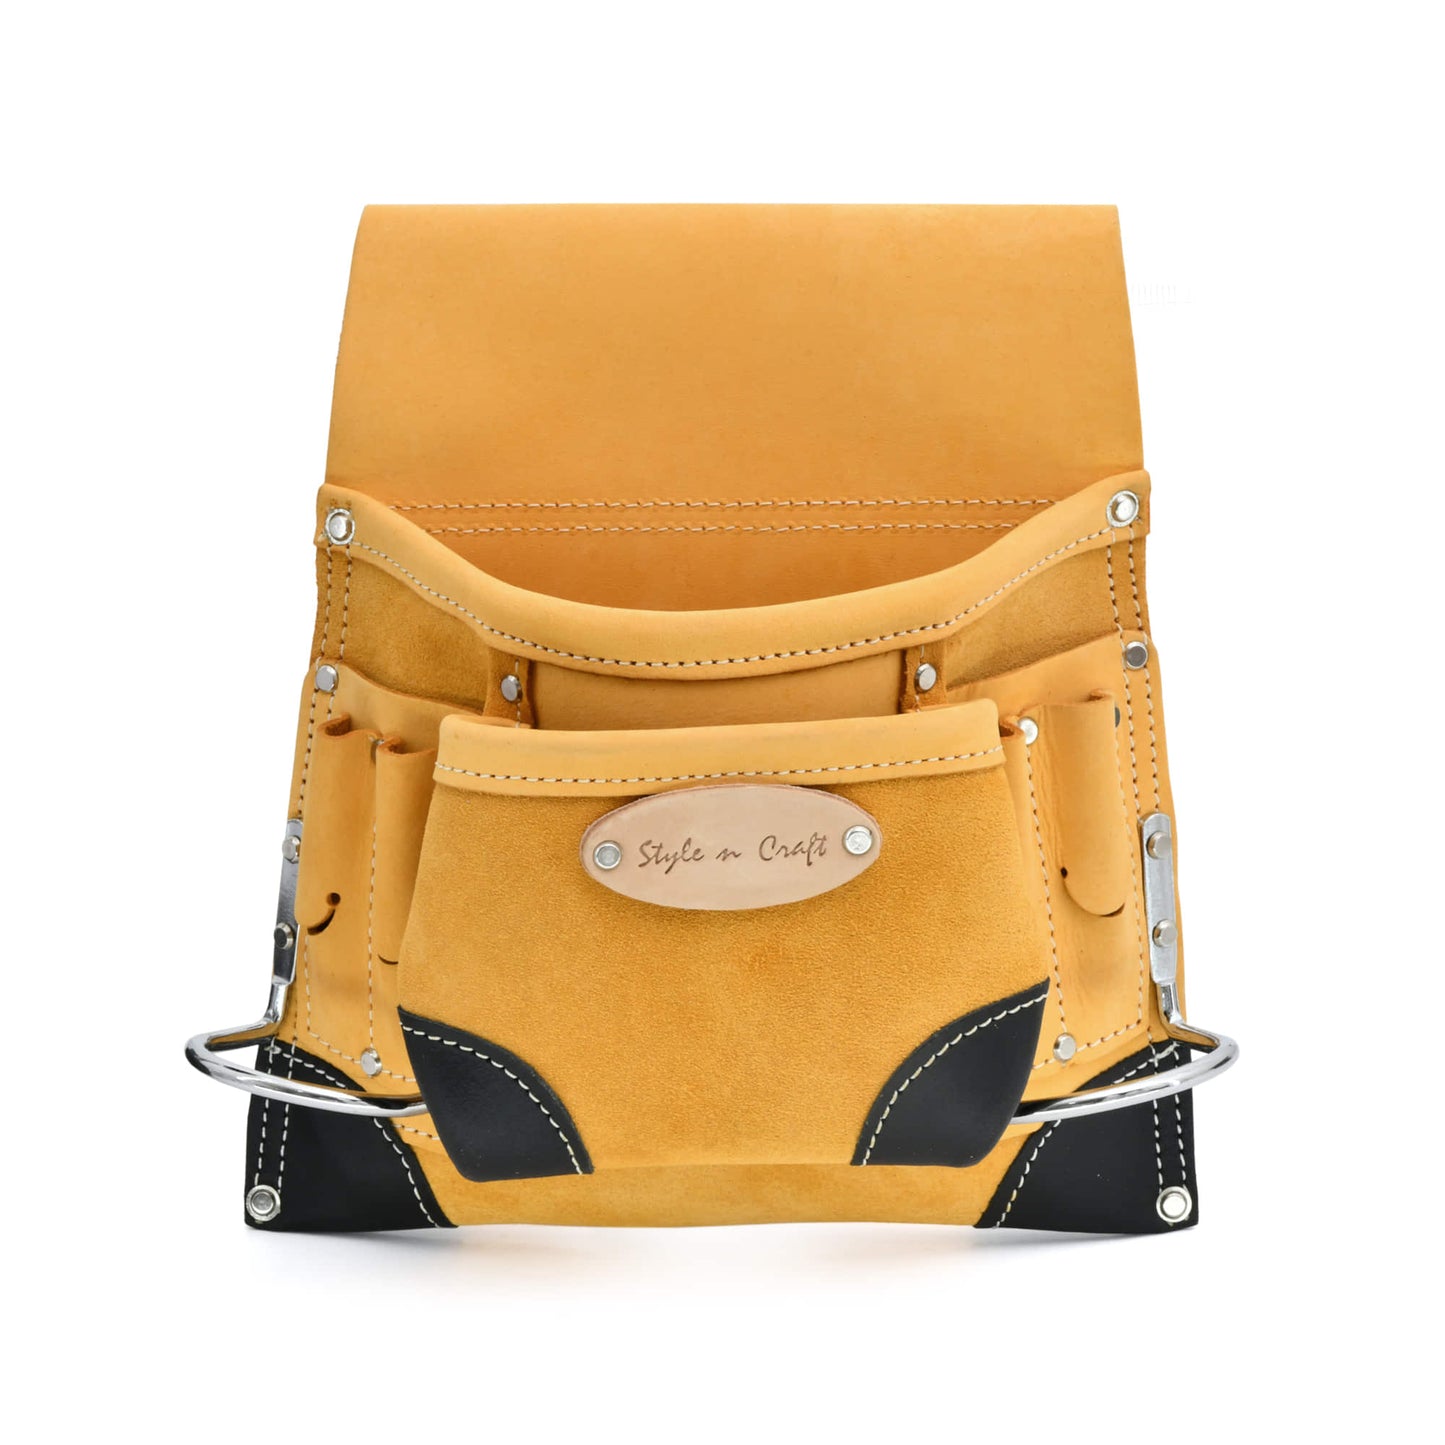 Style n Craft's 93823 - 8 Pocket Carpenter's Nail & Tool Pouch in Yellow Full Grain Leather with Reinforced Corners - Front View 